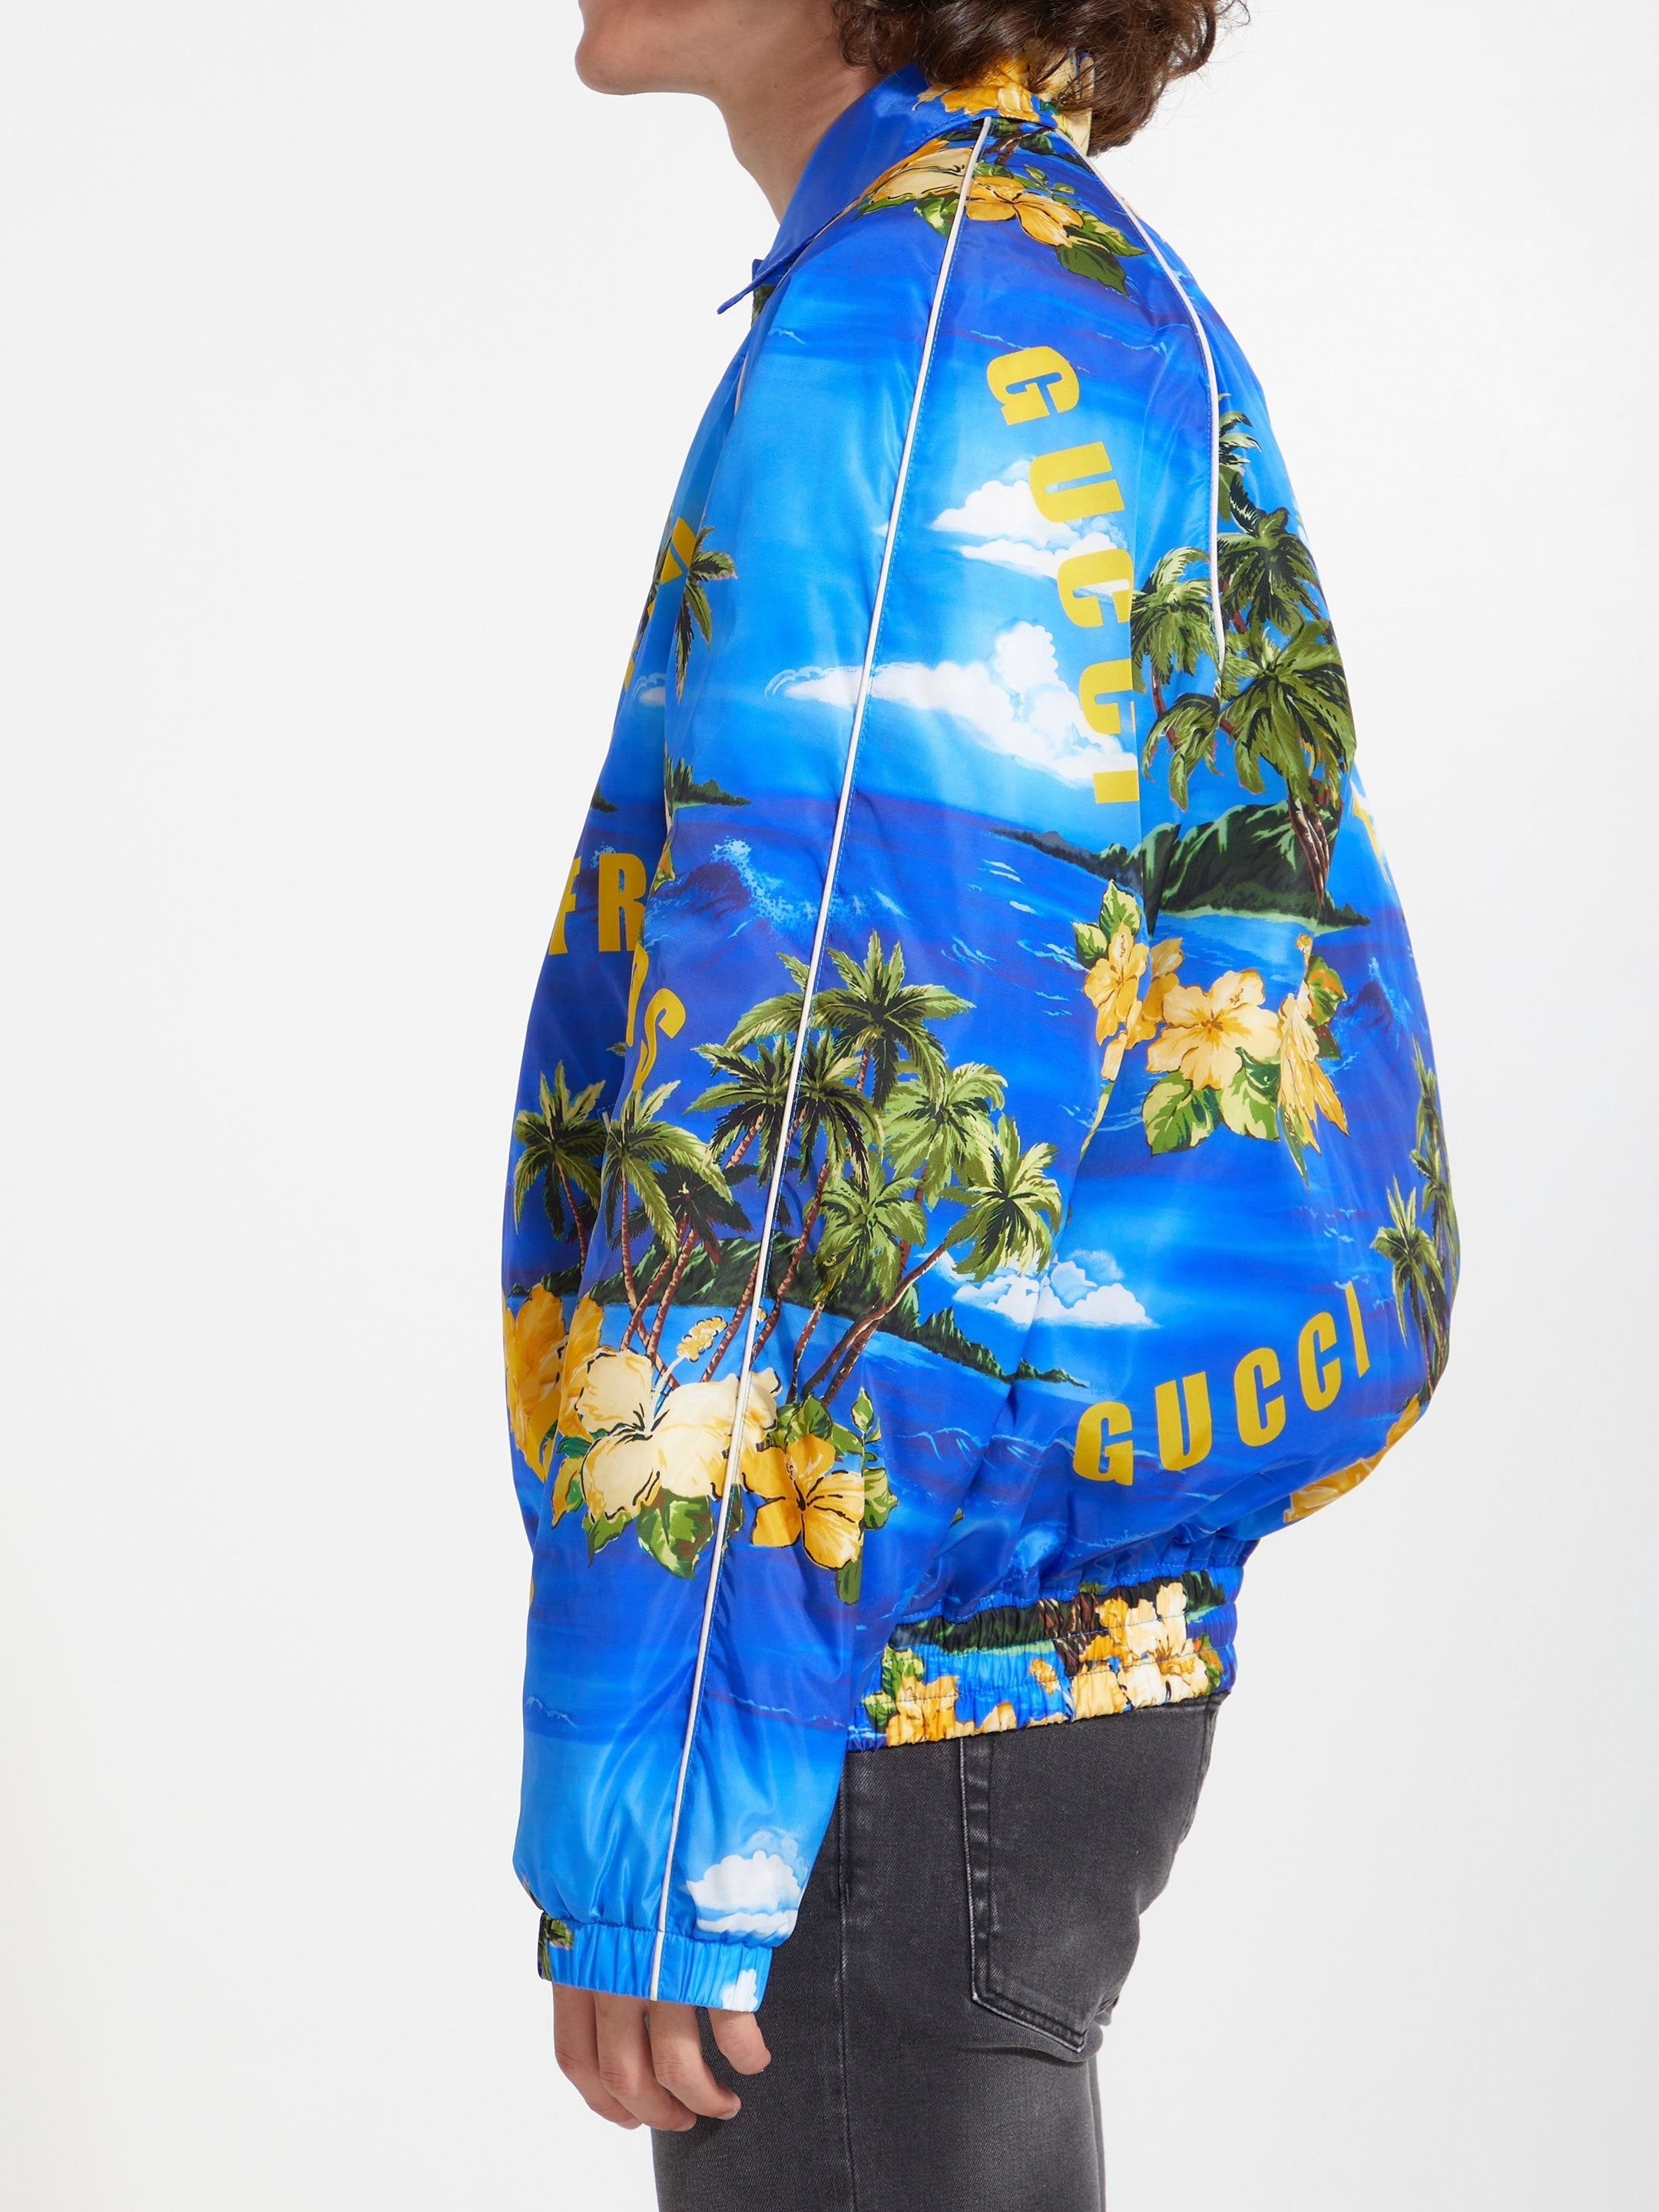 GUCCI-OUTLET-SALE-Nylon-jacket-with-print-Jacken-Mantel-48-BLUE-ARCHIVE-COLLECTION-3.jpg